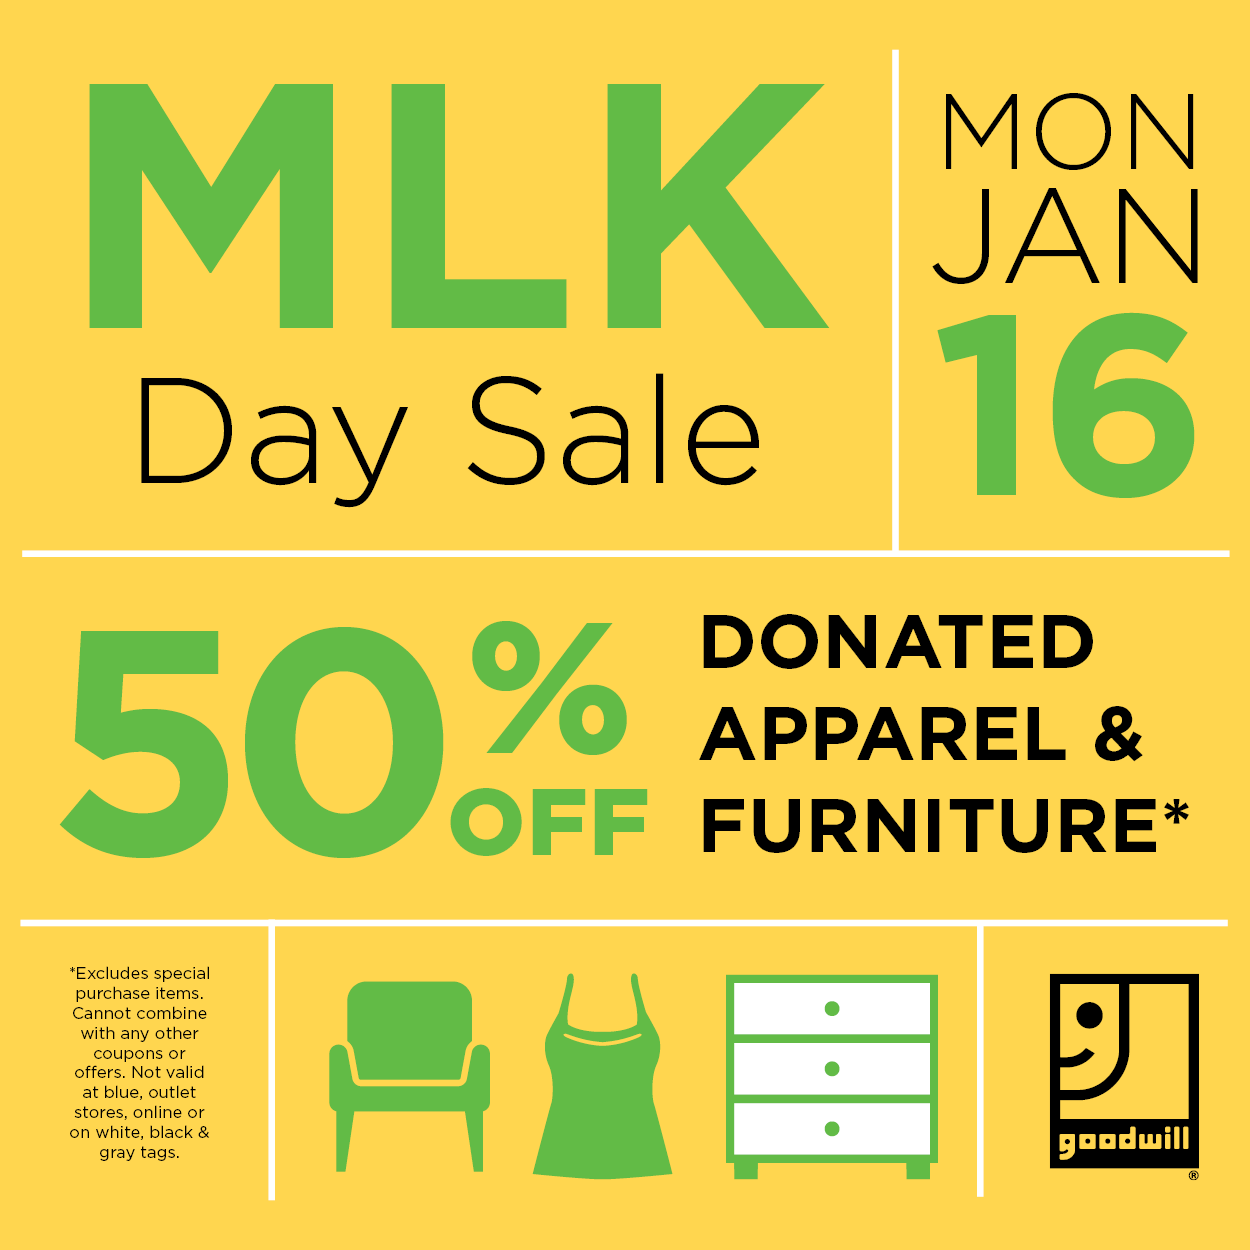 MLK Day Sale on Jan 16 50 off donated apparel and furniture